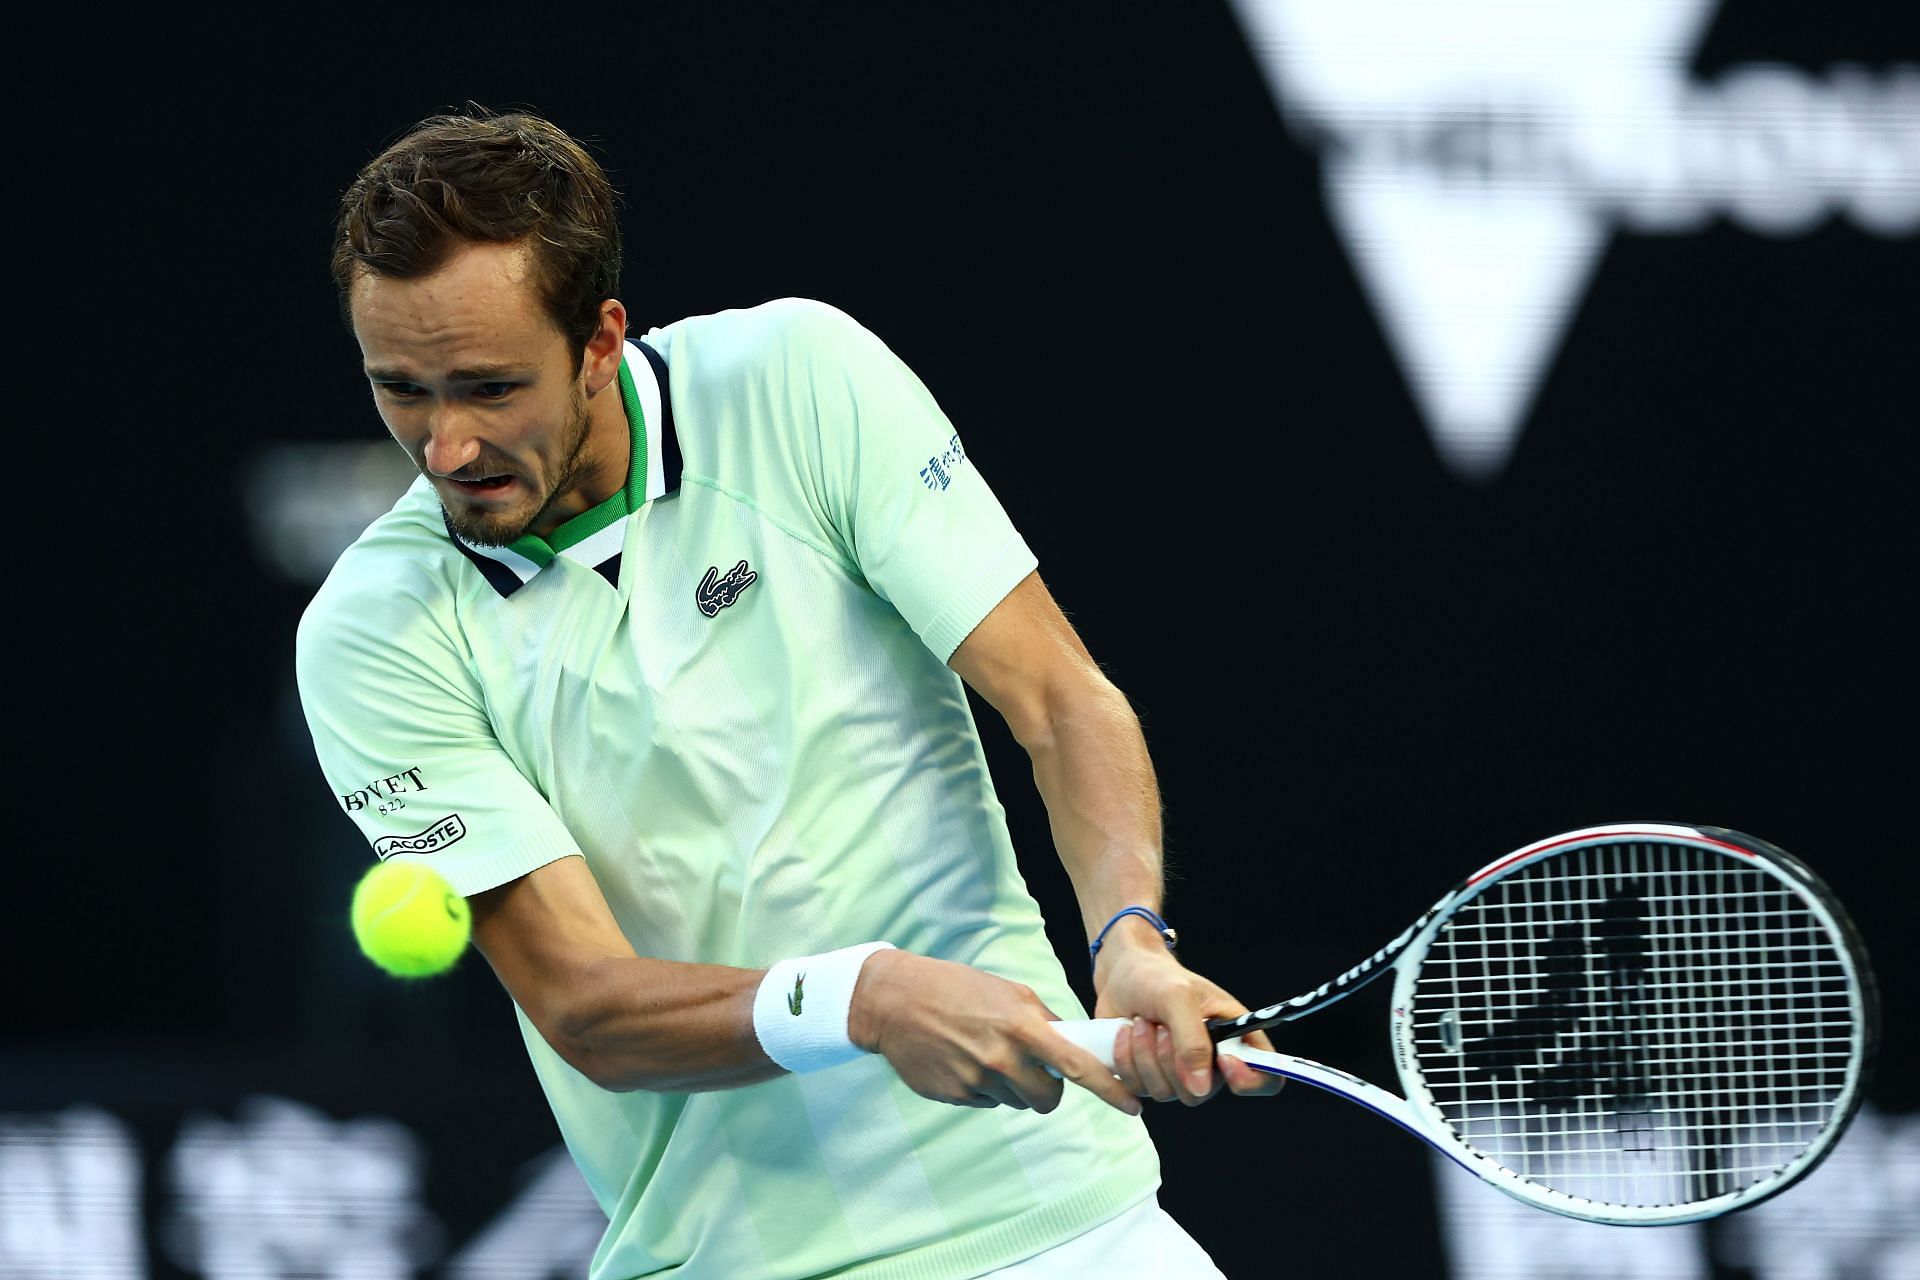 Daniil Medvedev has to navigate a few tough matches enroute to the Mexican Open title